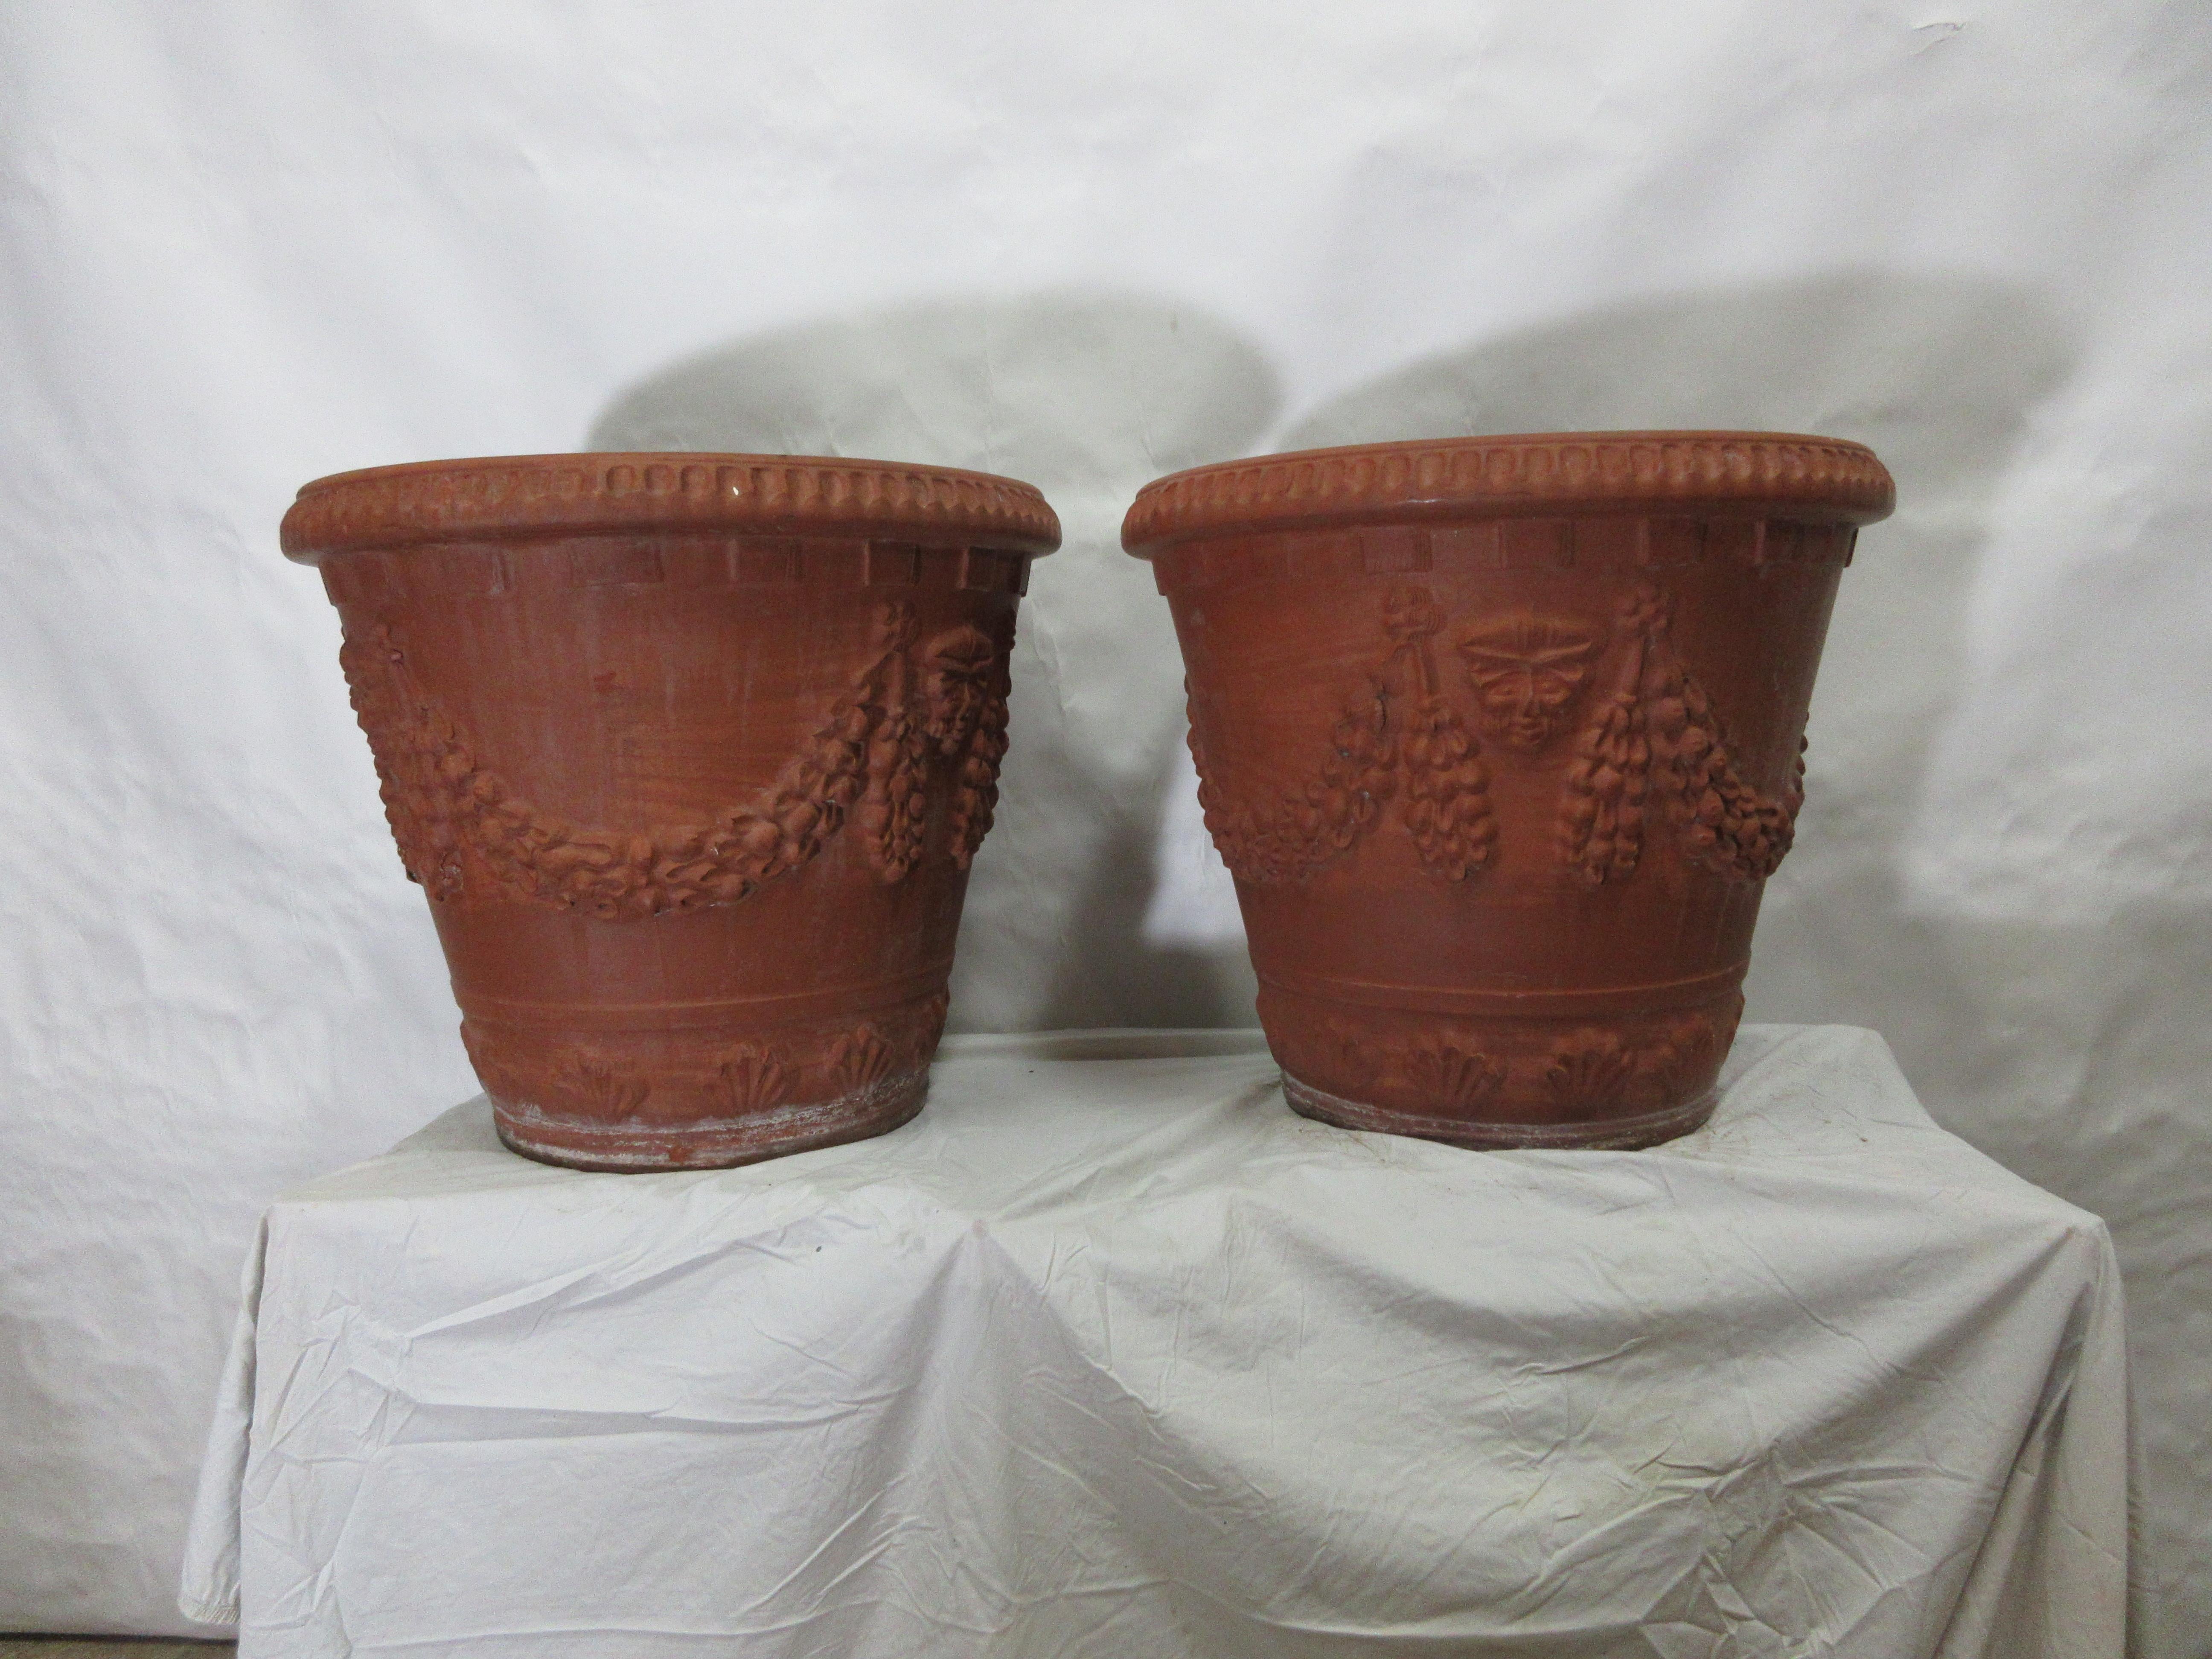 This is a set of 2 original finish Gustavian style Italian terracotta planters. I actually have 6 sets of 2.